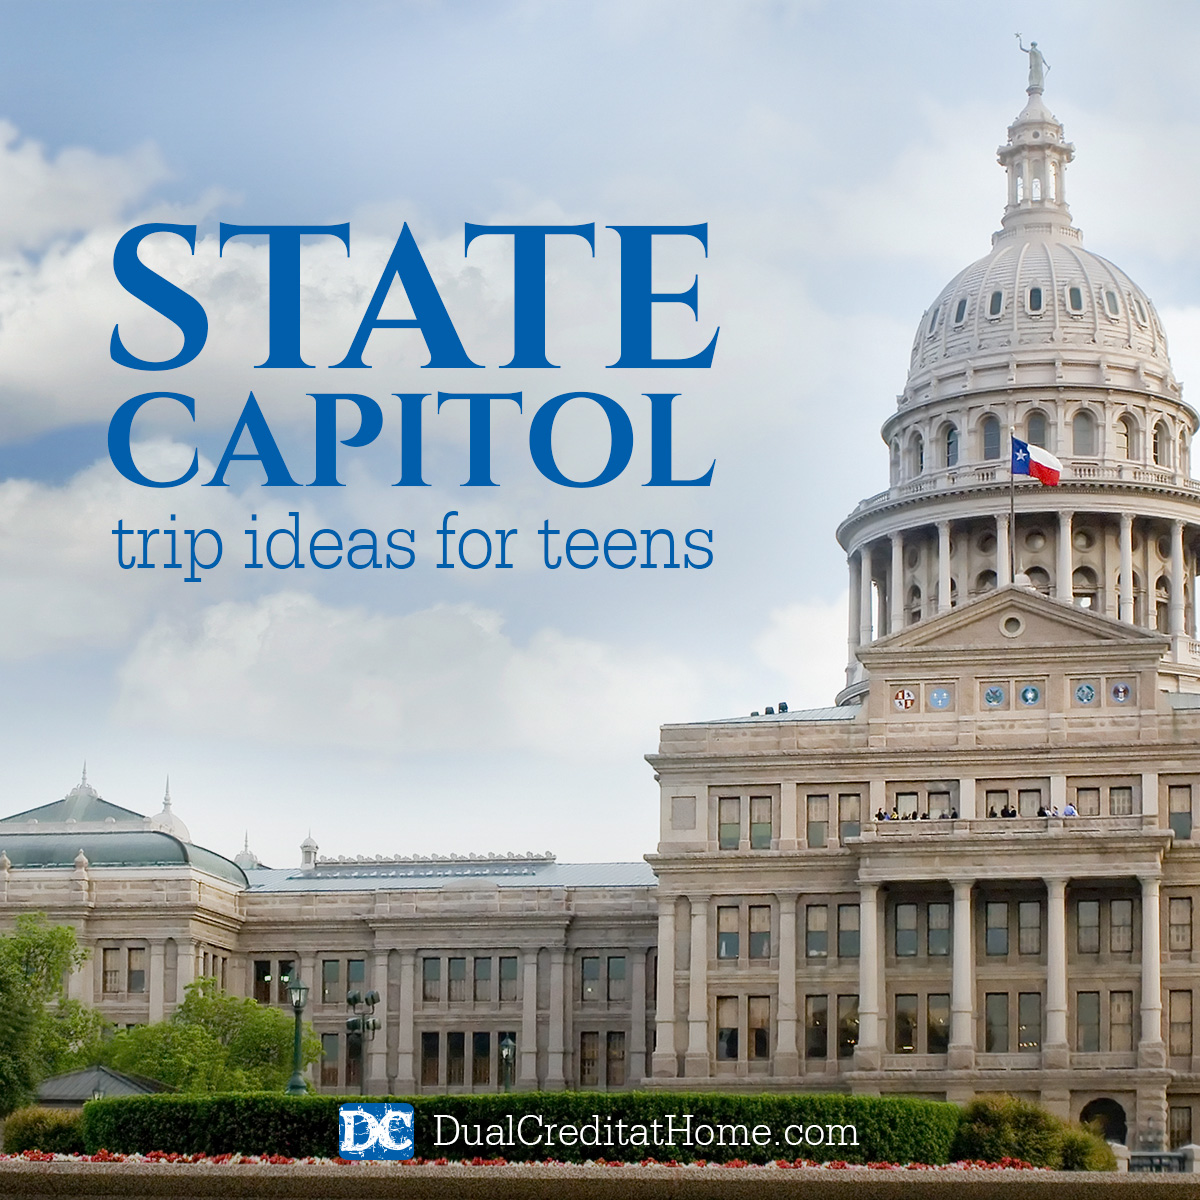 State Capitol Trip Ideas for Teens